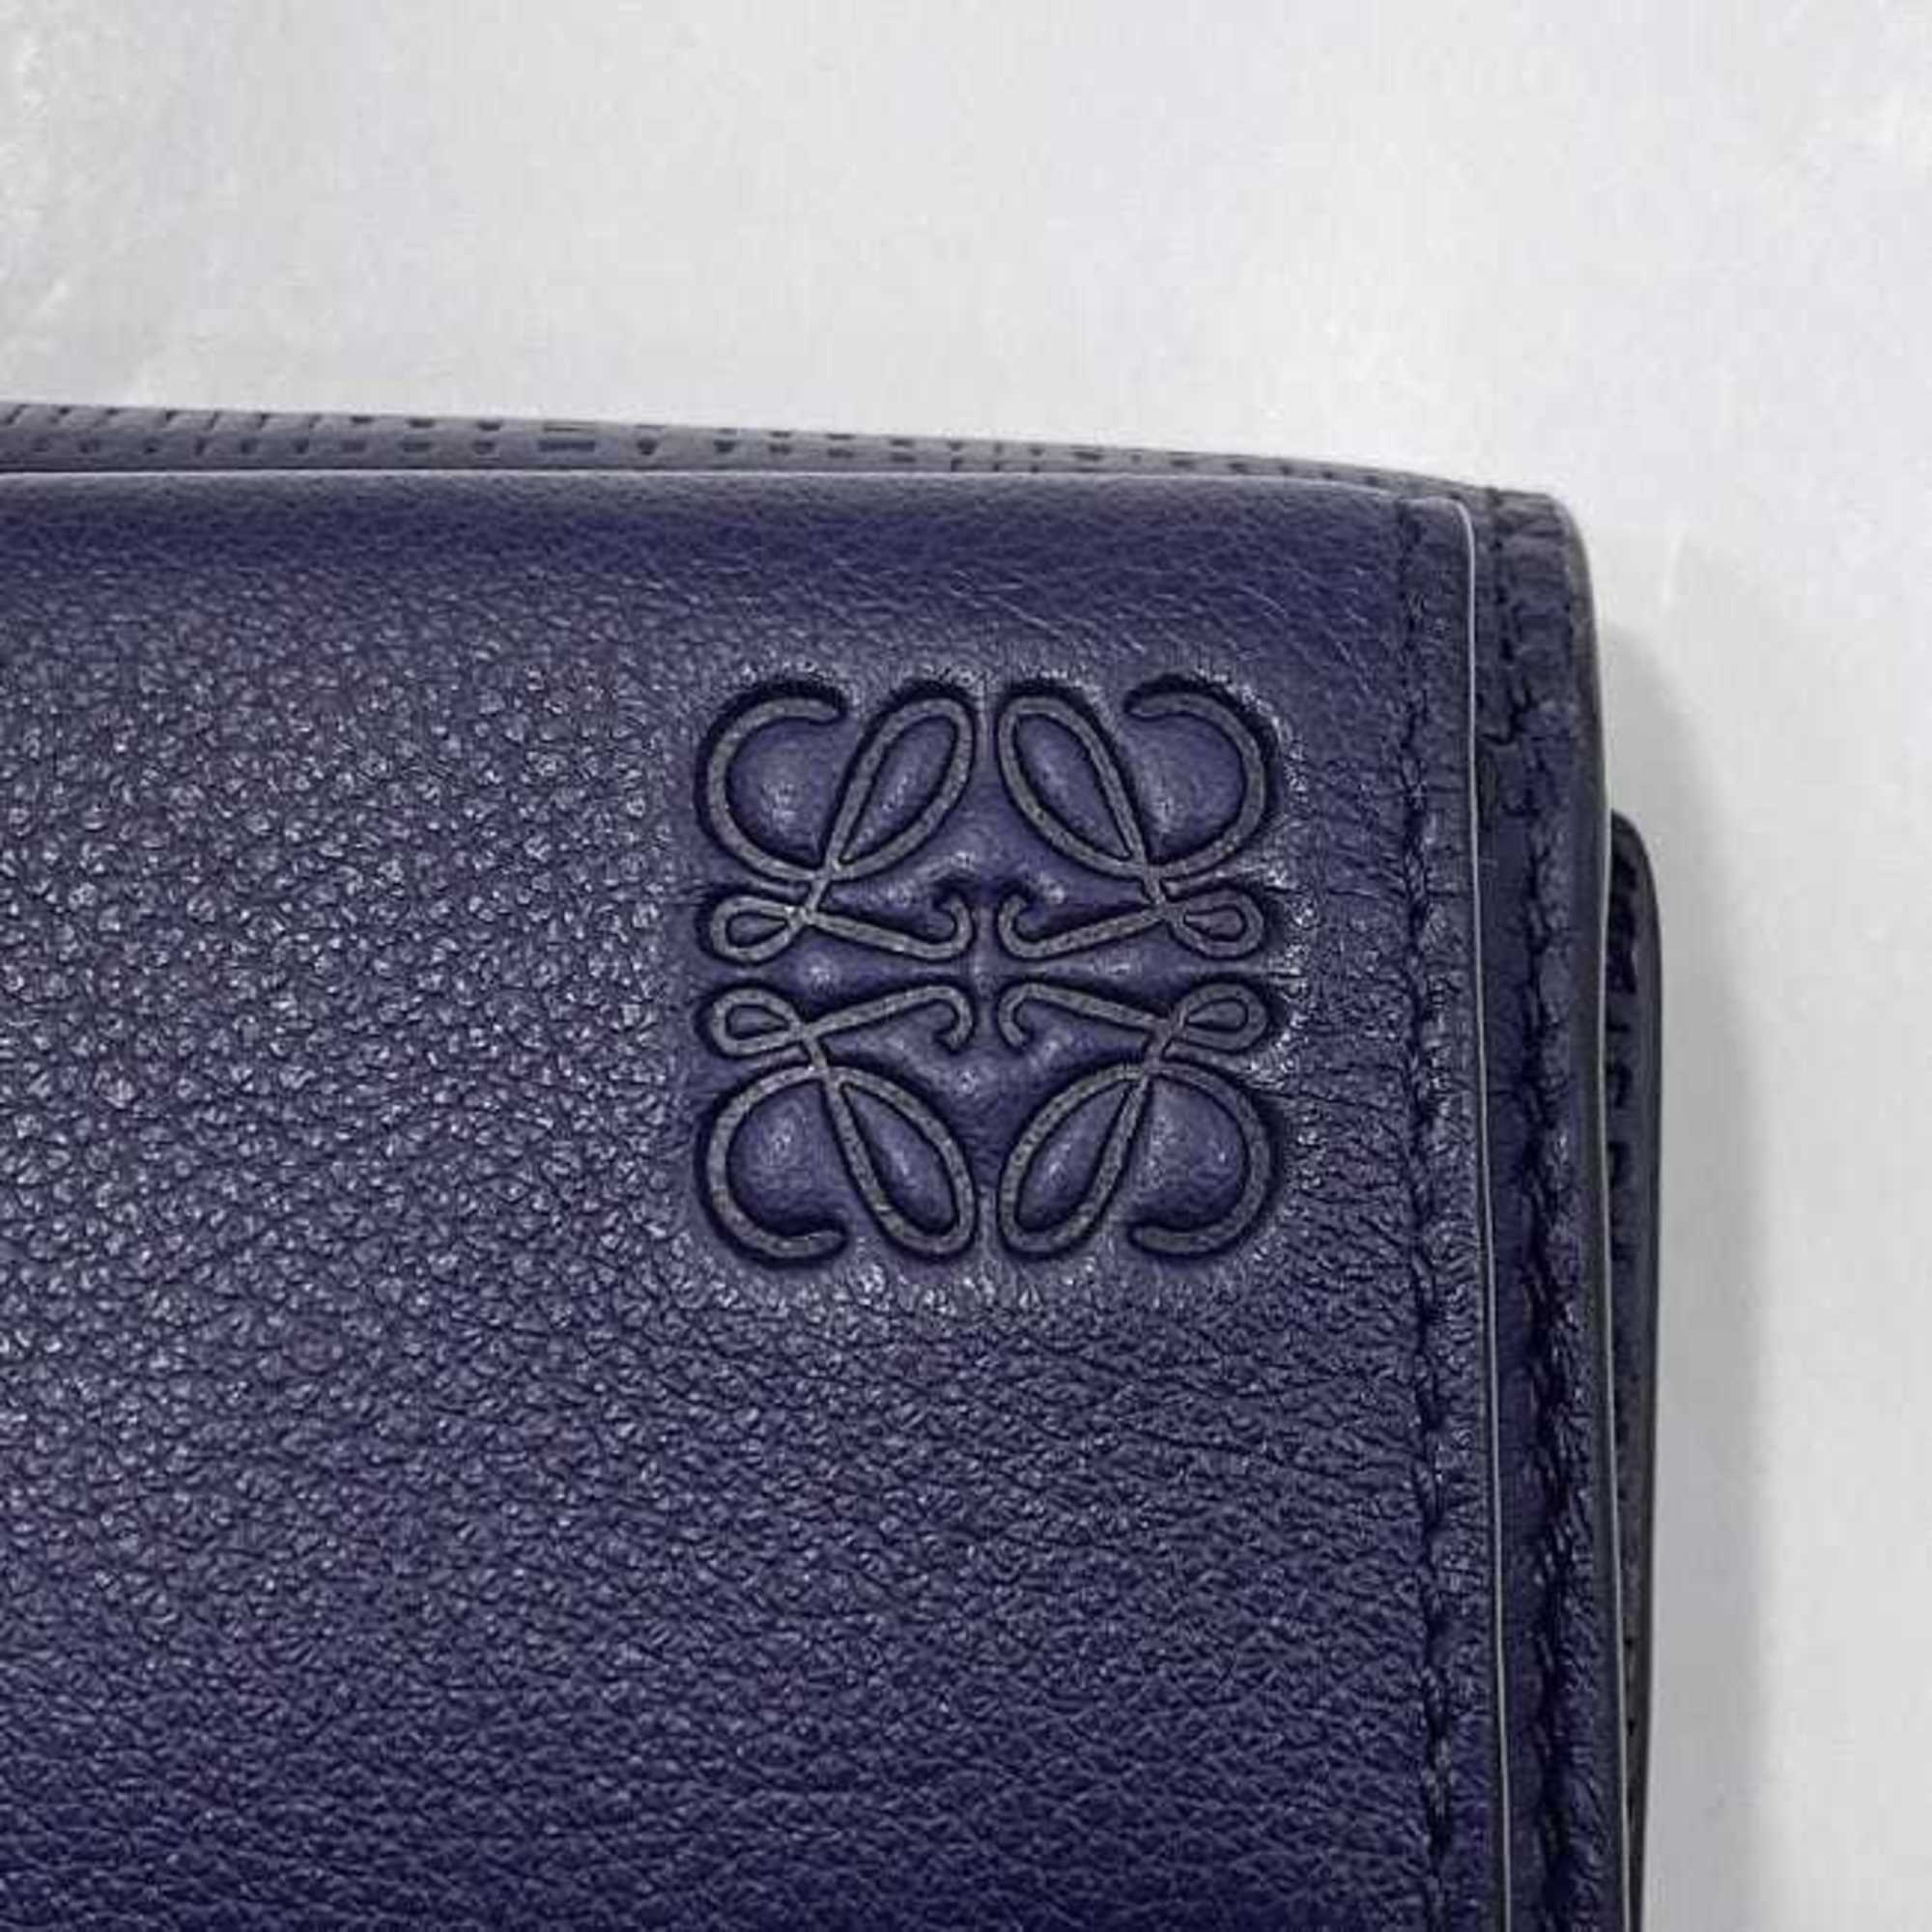 LOEWE Tri-fold Wallet Navy Repeat Anagram 101.88.S26 f-20476 Leather Grained Compact